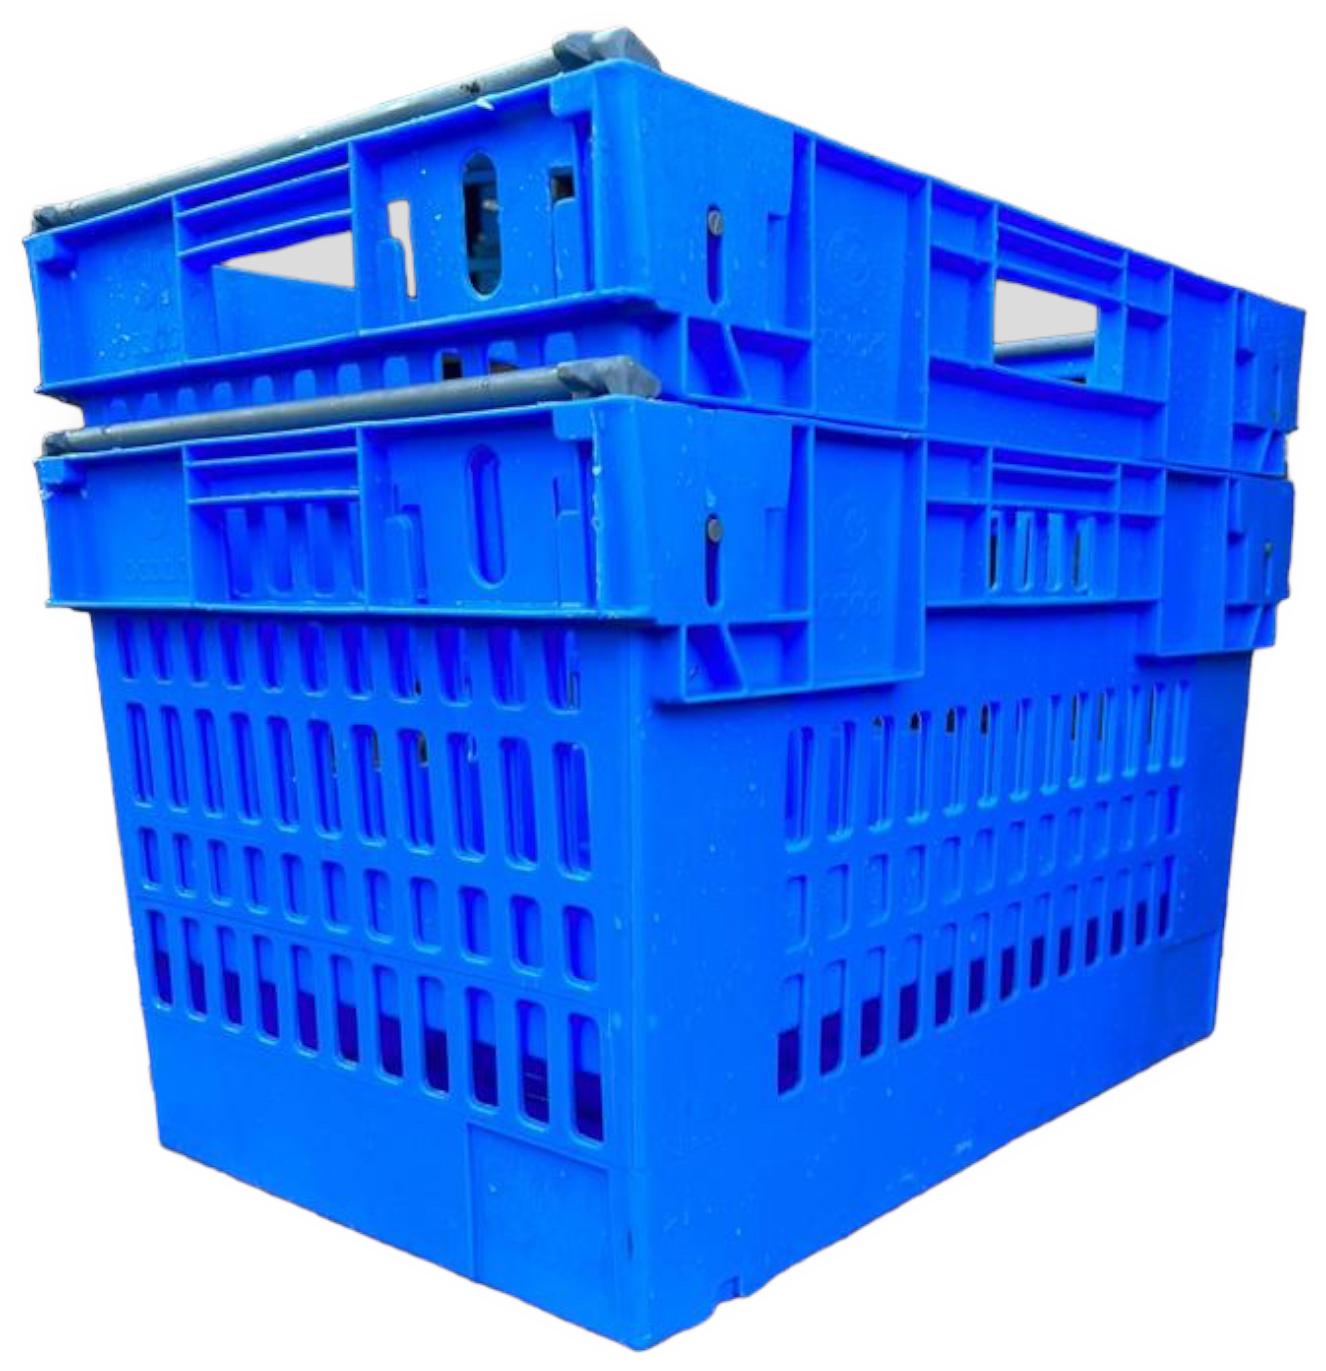 400x300x185 Bale Arm Crate Black 15LTR - Pack of 14 For Supermarkets